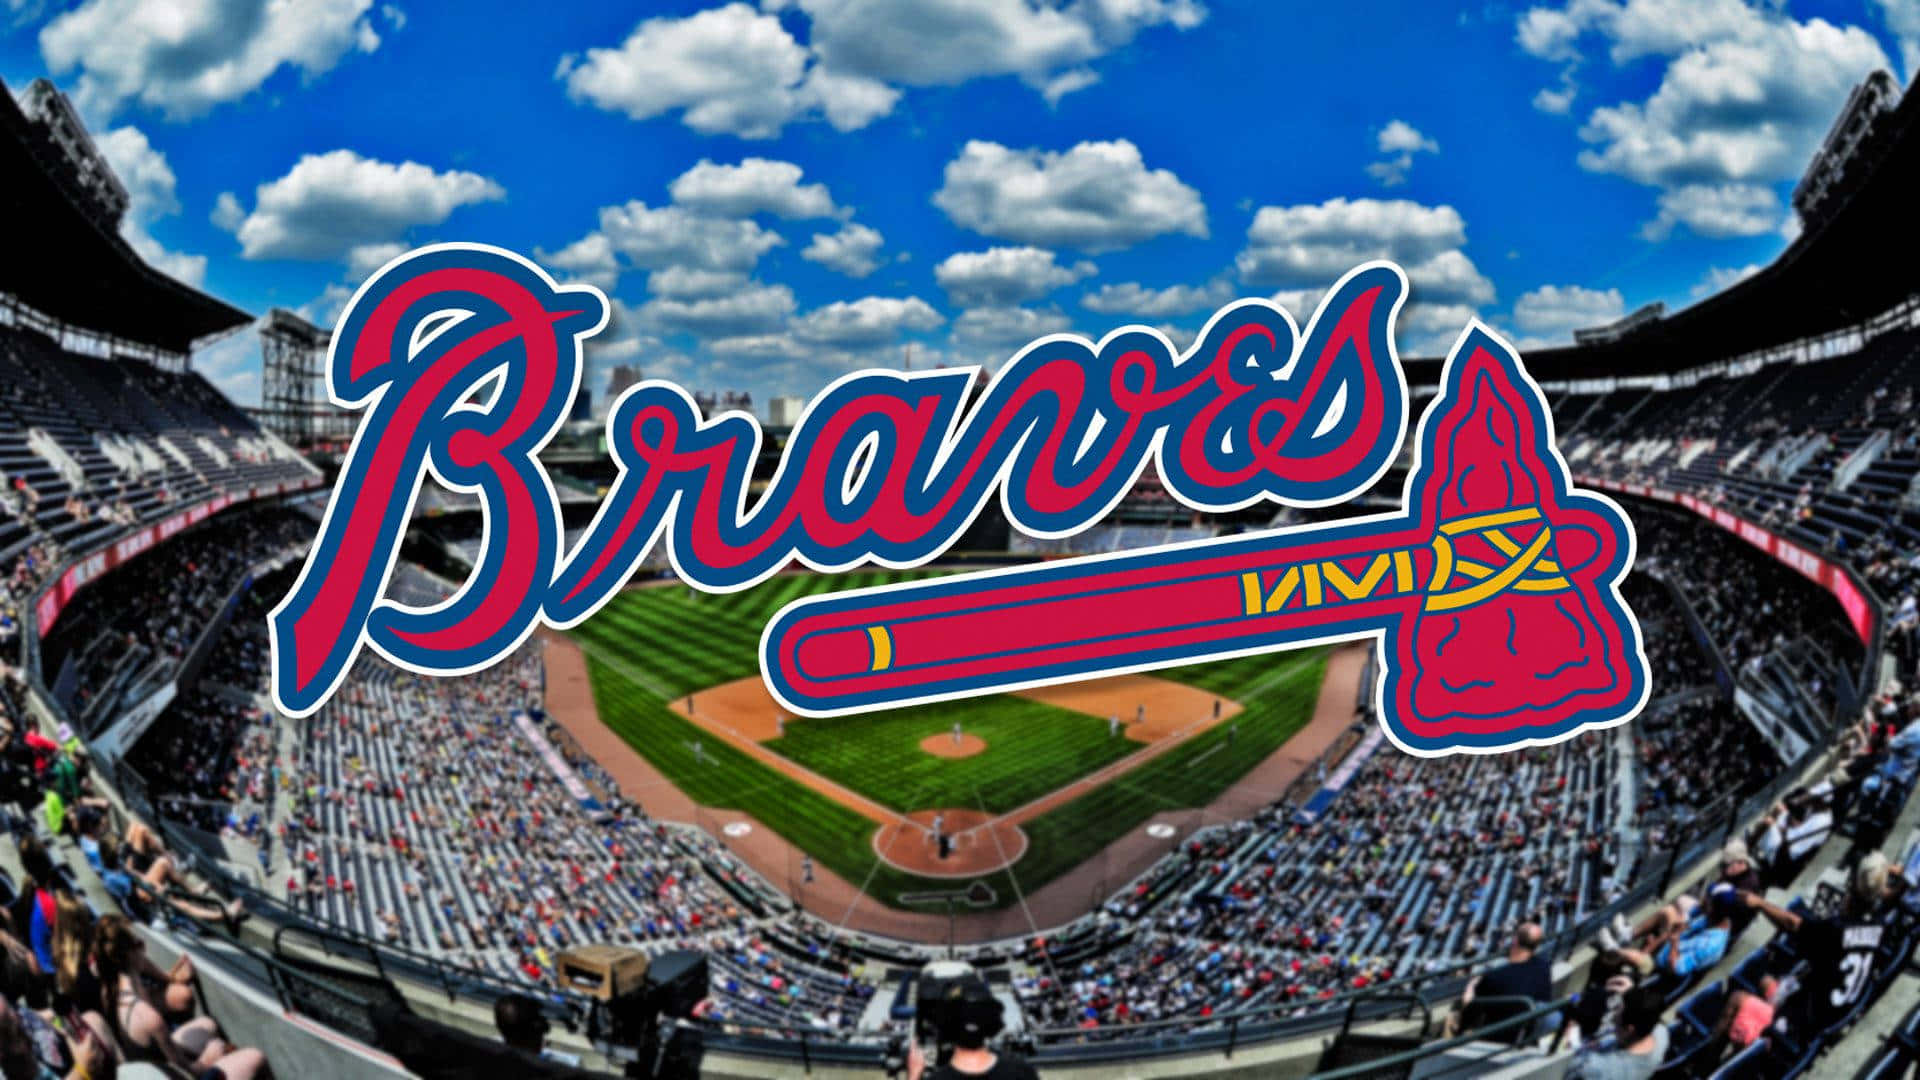 Celebrate the Atlanta Braves with this hd wallpaper Wallpaper